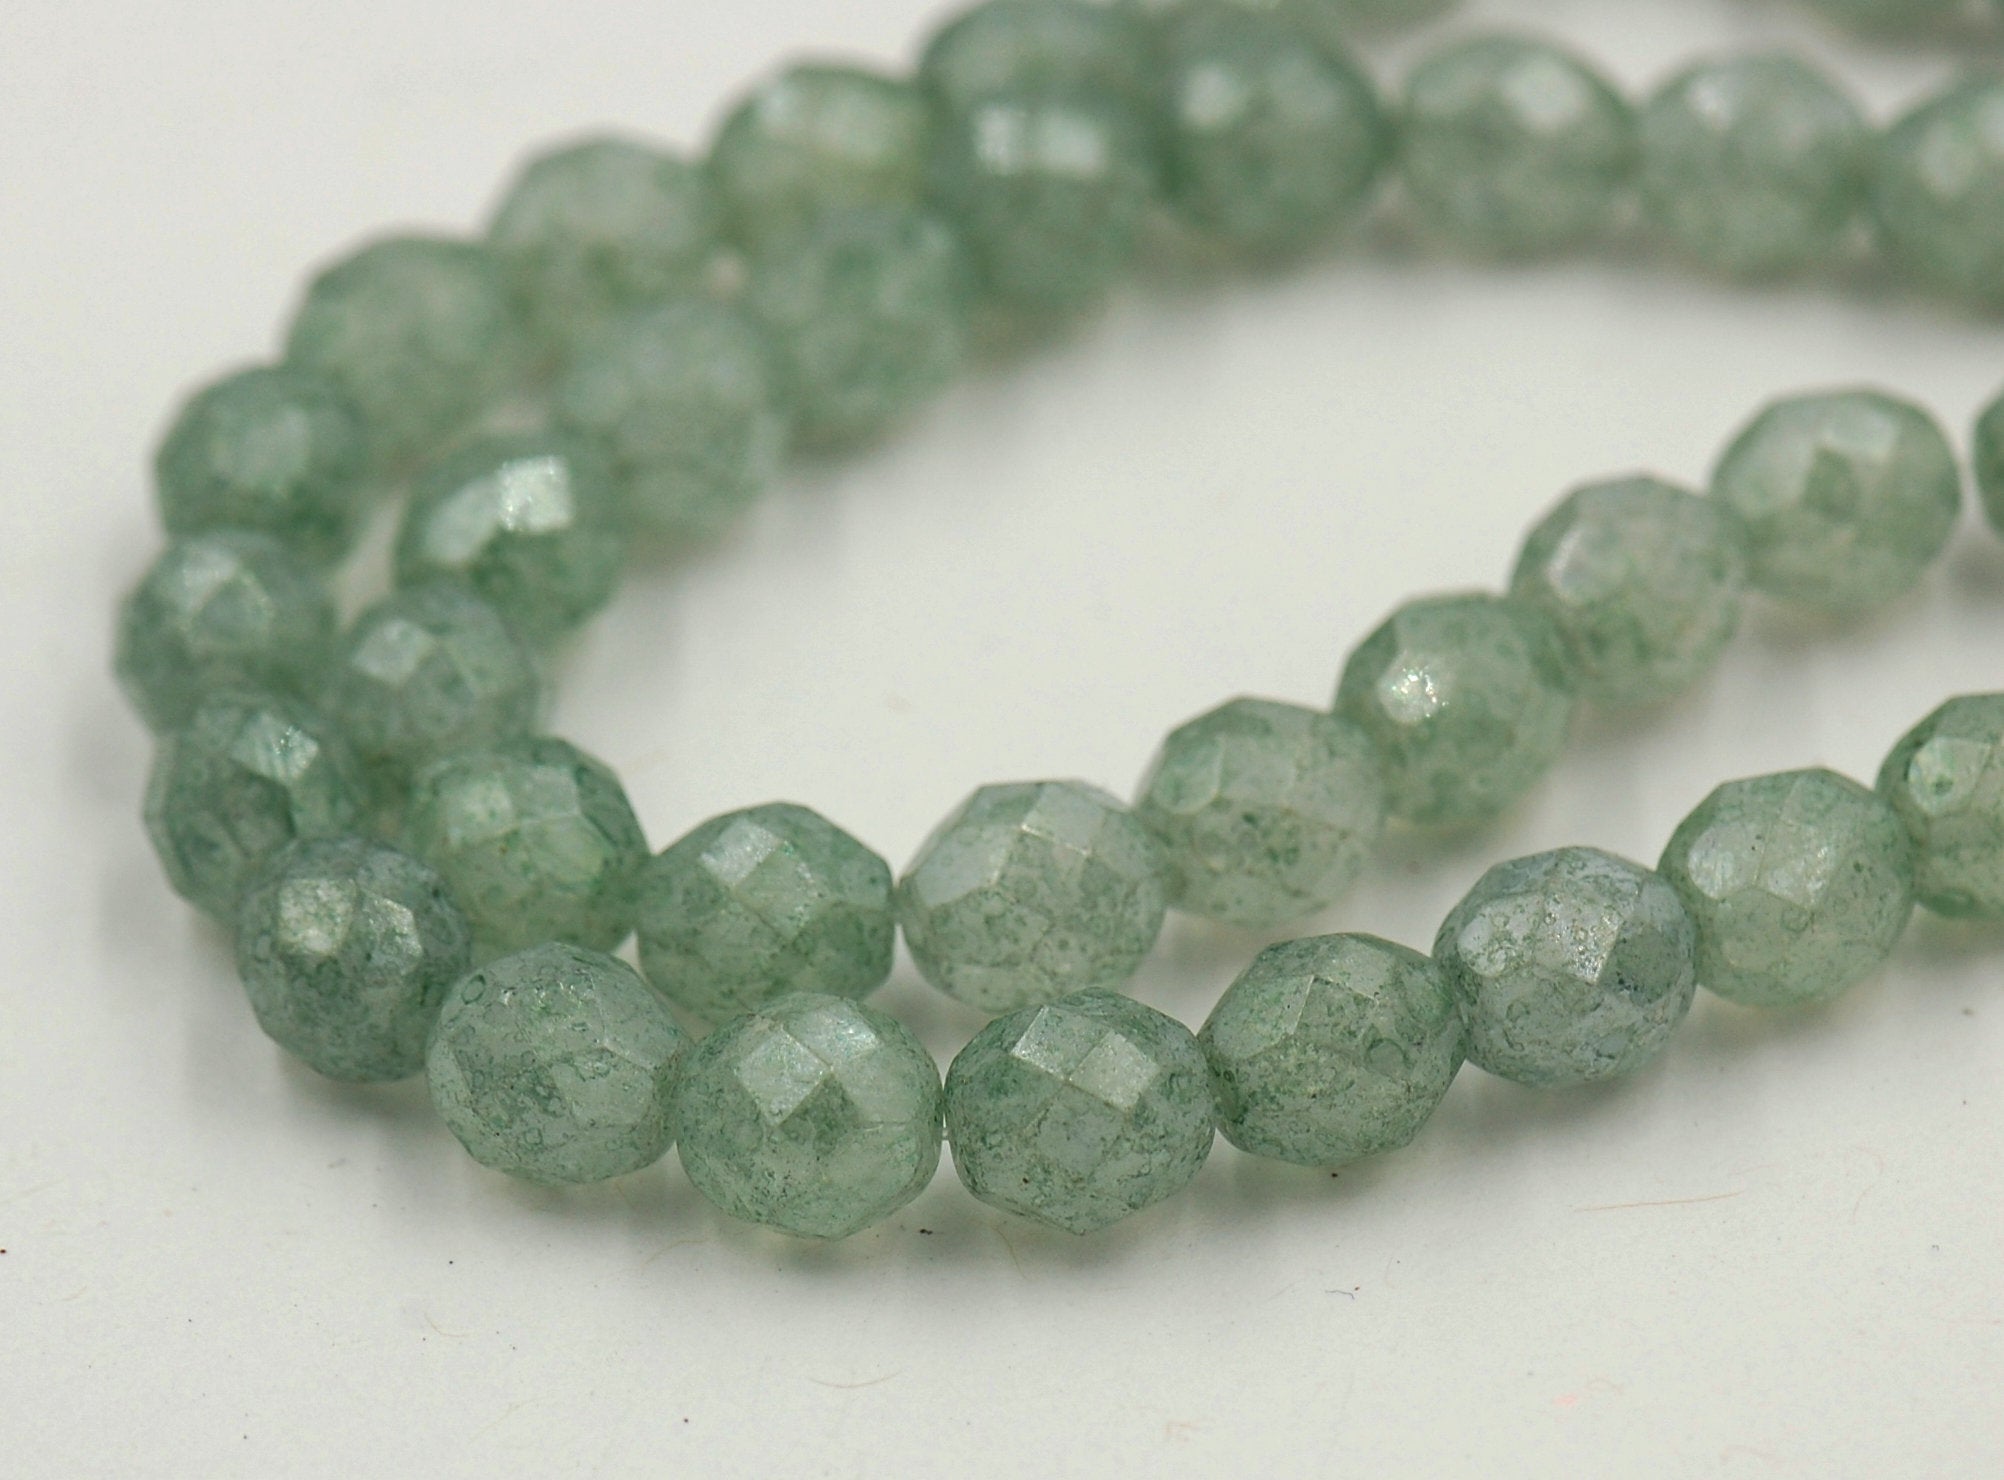 Stone Green Luster Faceted Czech Glass Bead 8mm Round - 25 Pc